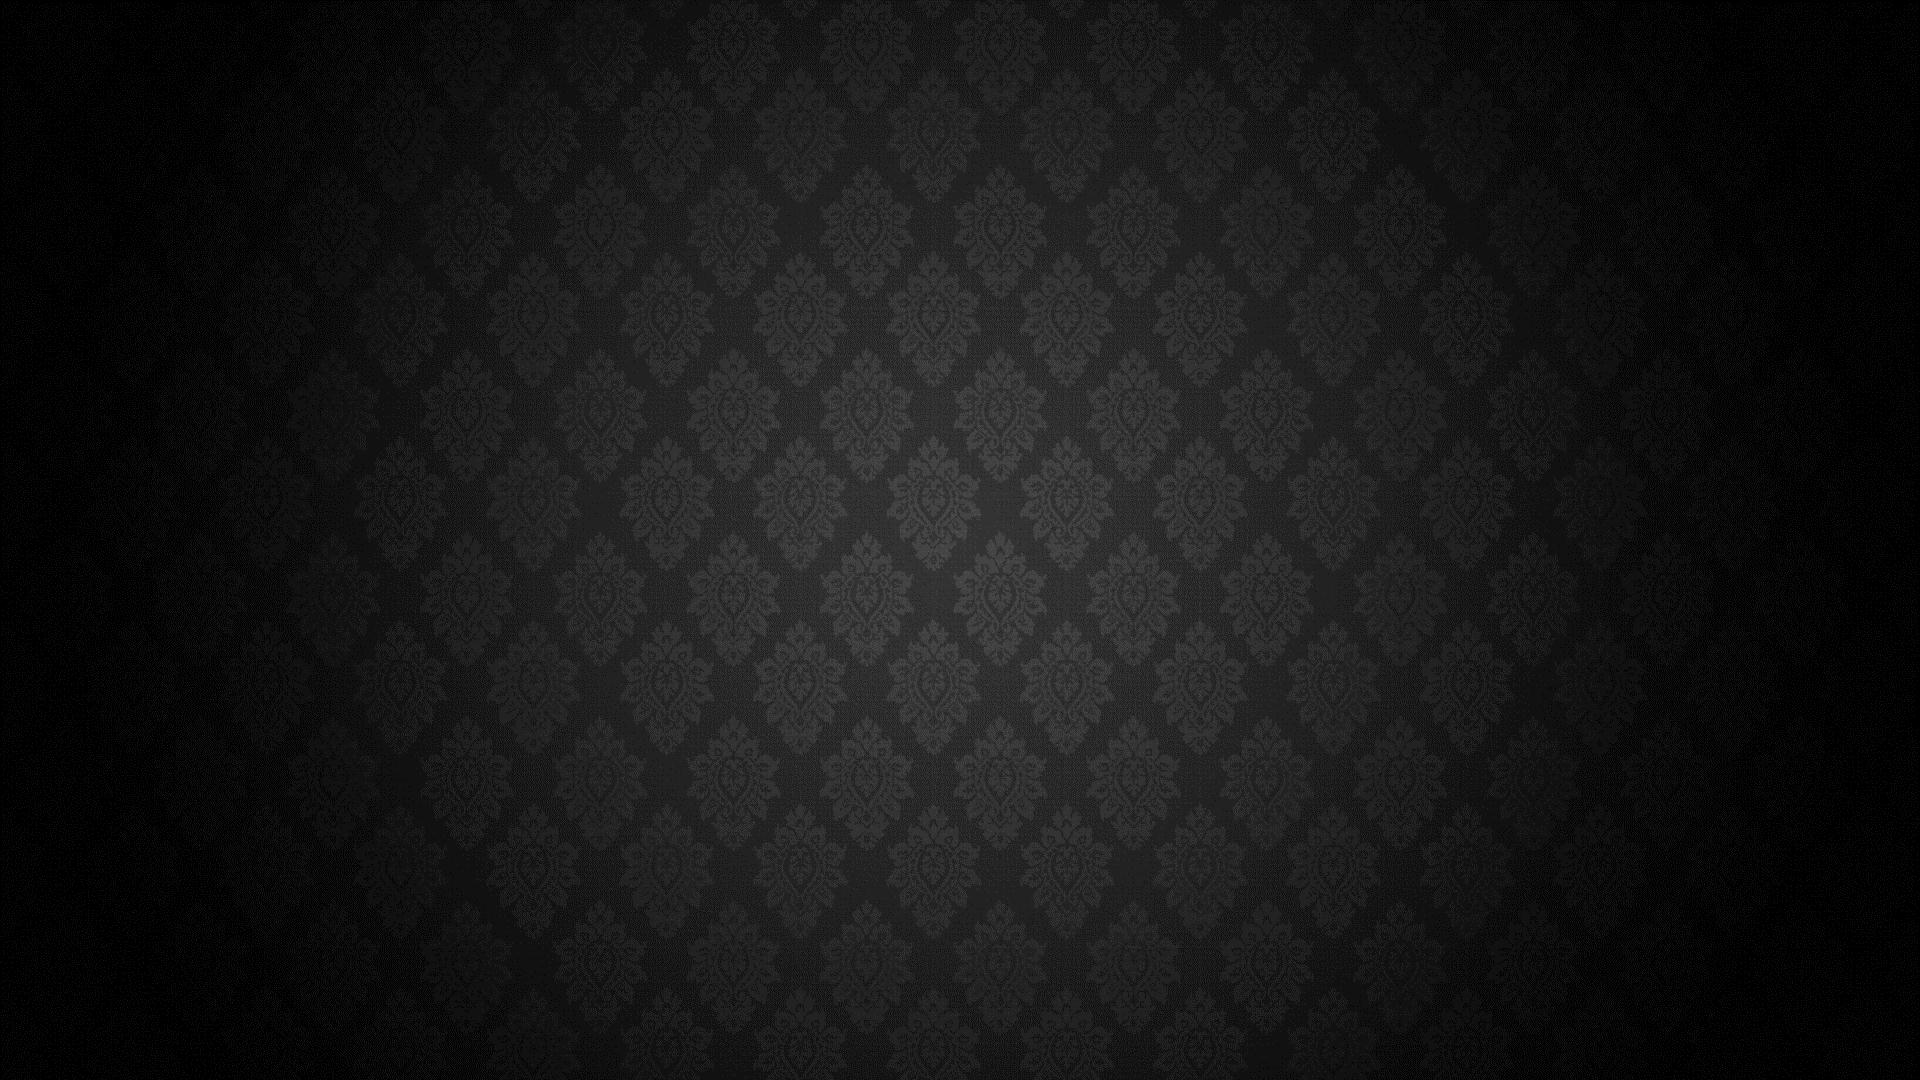 Neat Background Wallpaper 1920x1080PX Wallpaper Background